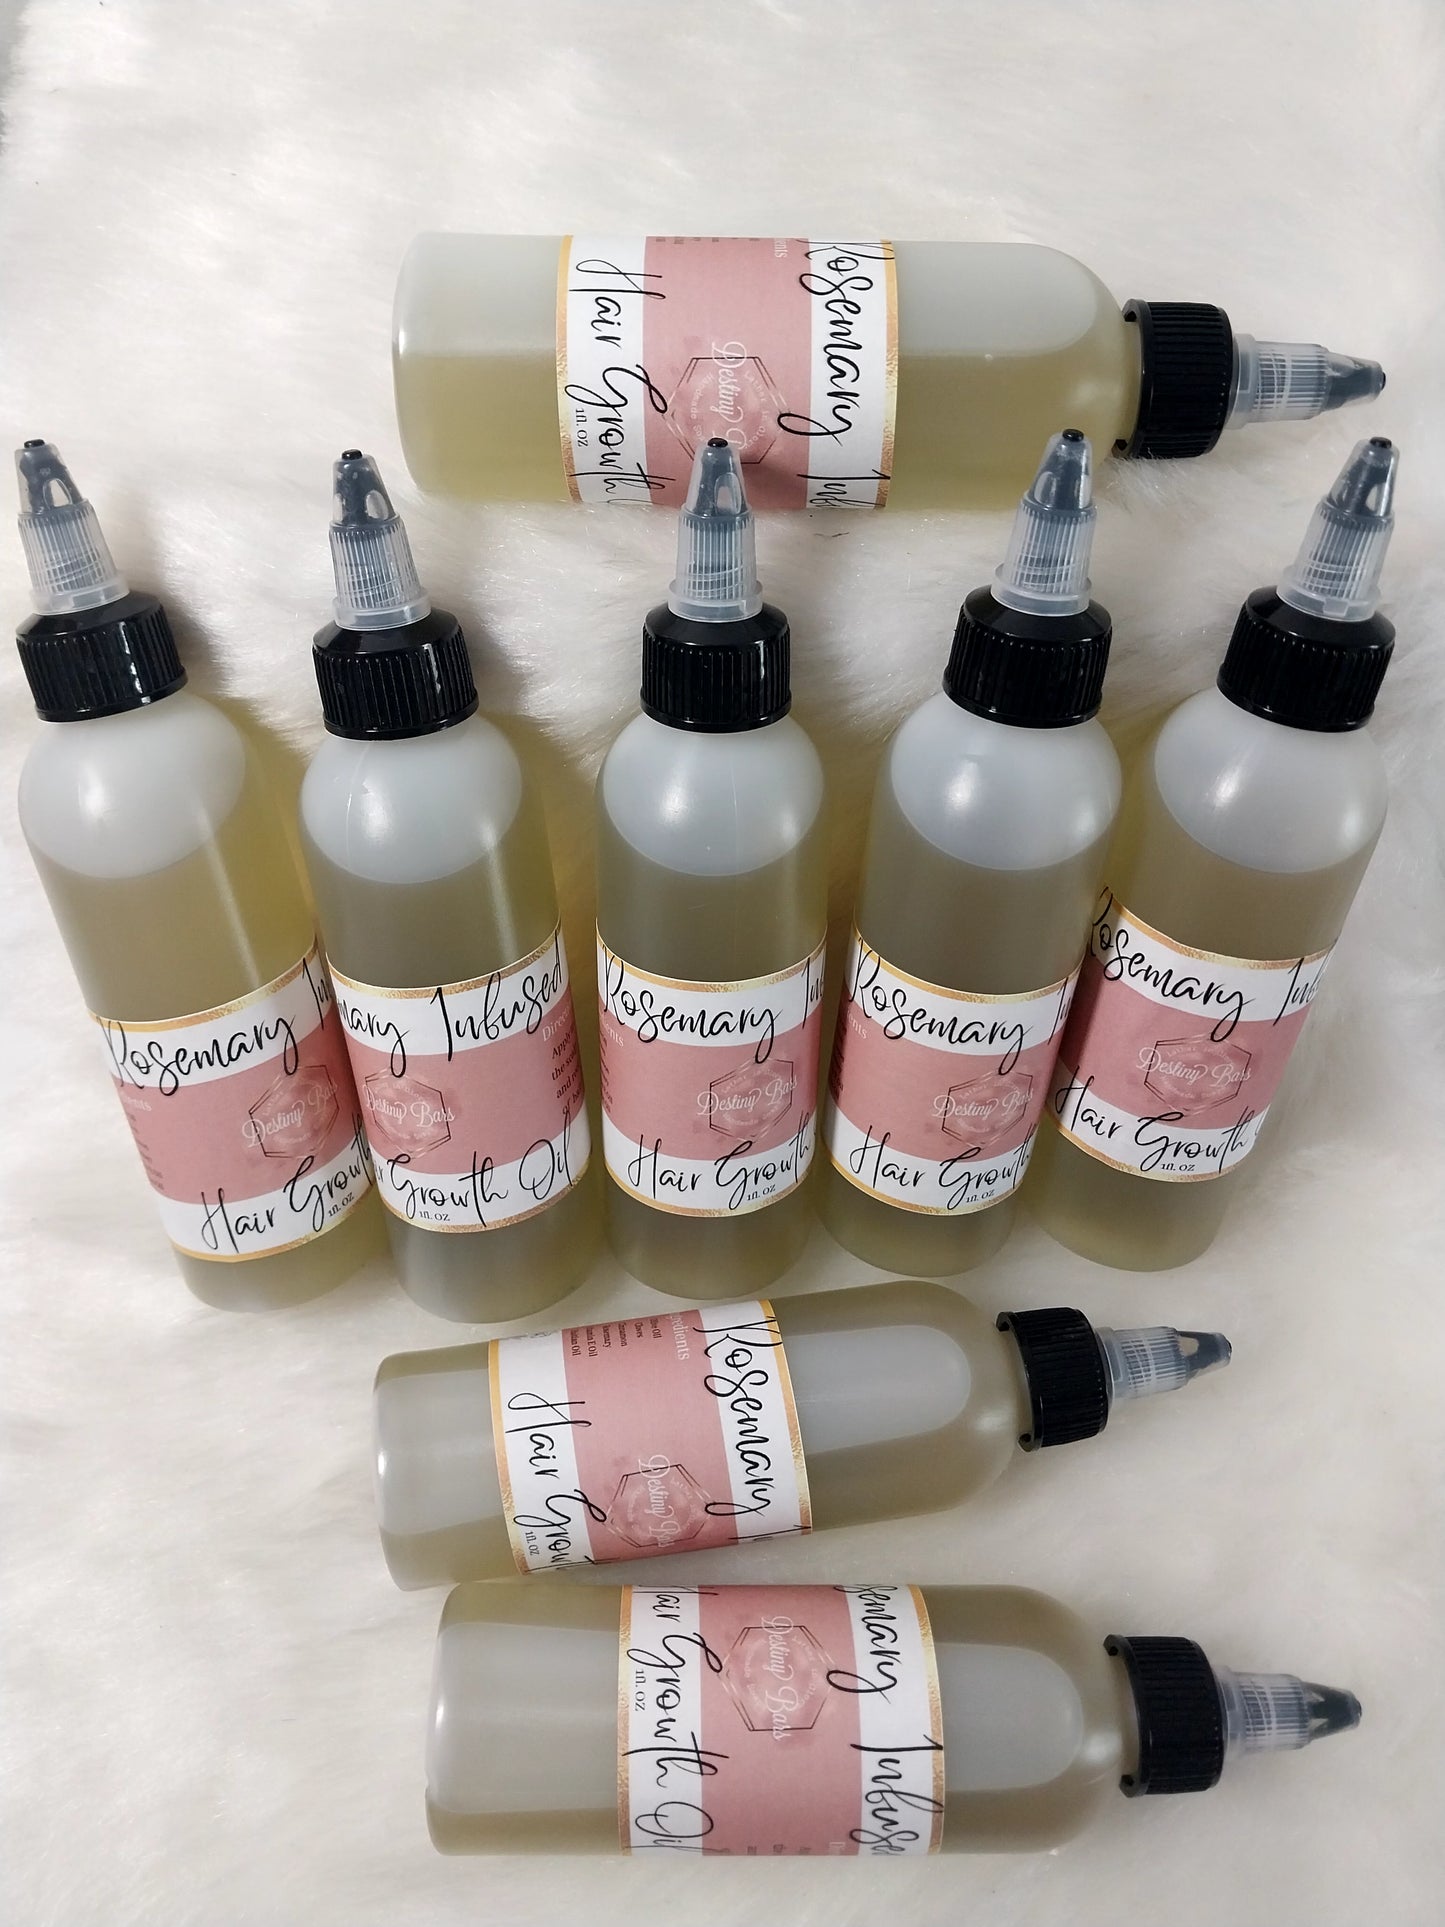 Rosemary Infused Hair Growth Oil